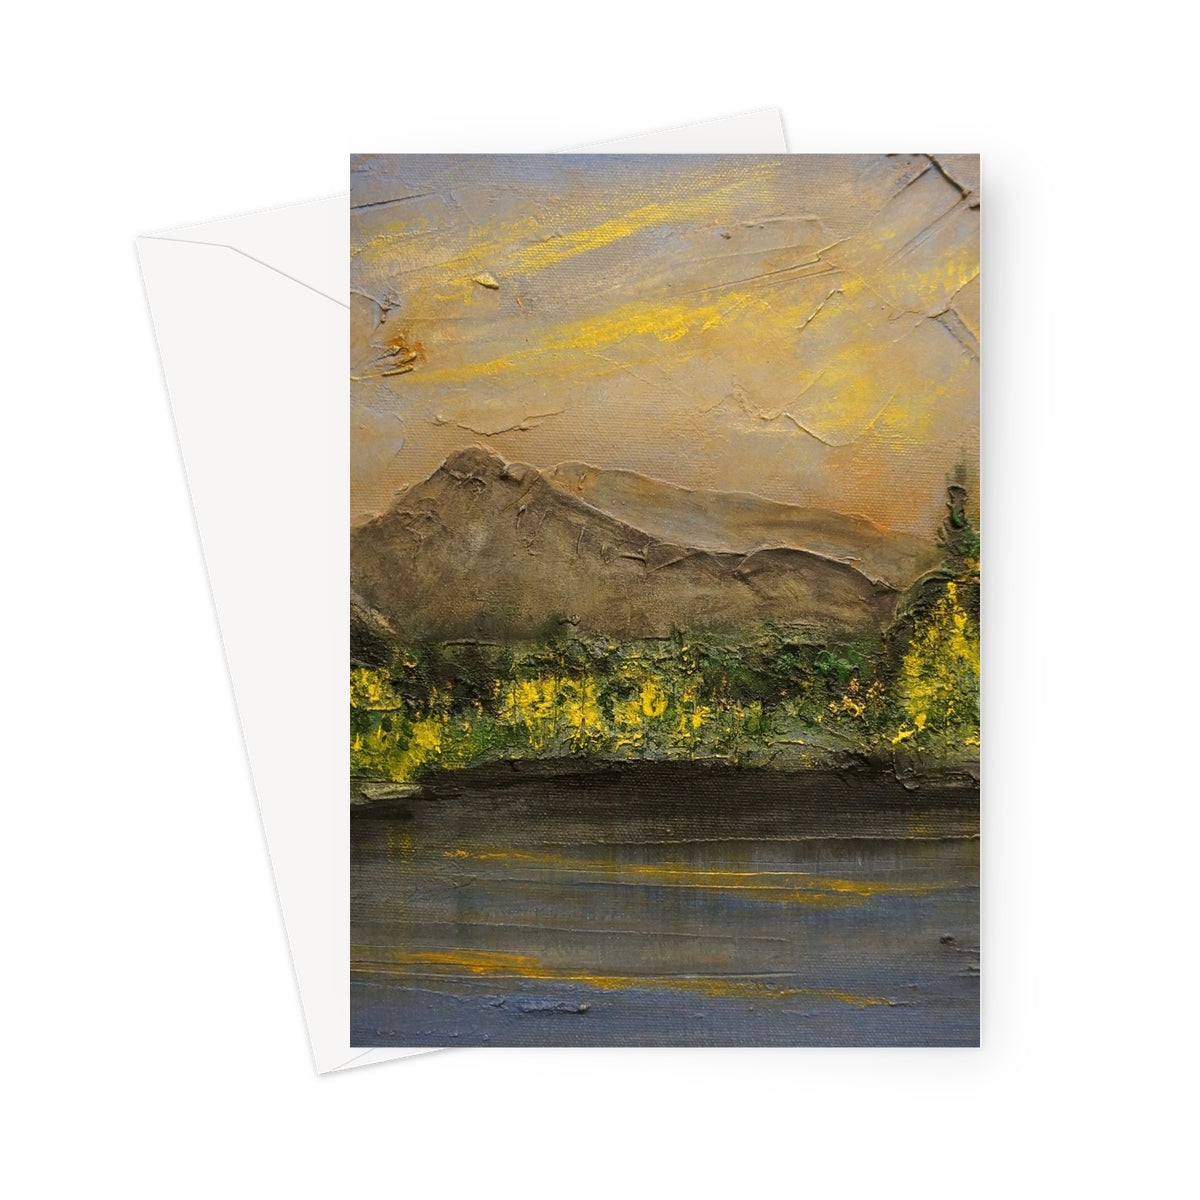 Glencoe Lochan Dusk Art Gifts Greeting Card-Greetings Cards-Scottish Lochs & Mountains Art Gallery-5"x7"-1 Card-Paintings, Prints, Homeware, Art Gifts From Scotland By Scottish Artist Kevin Hunter